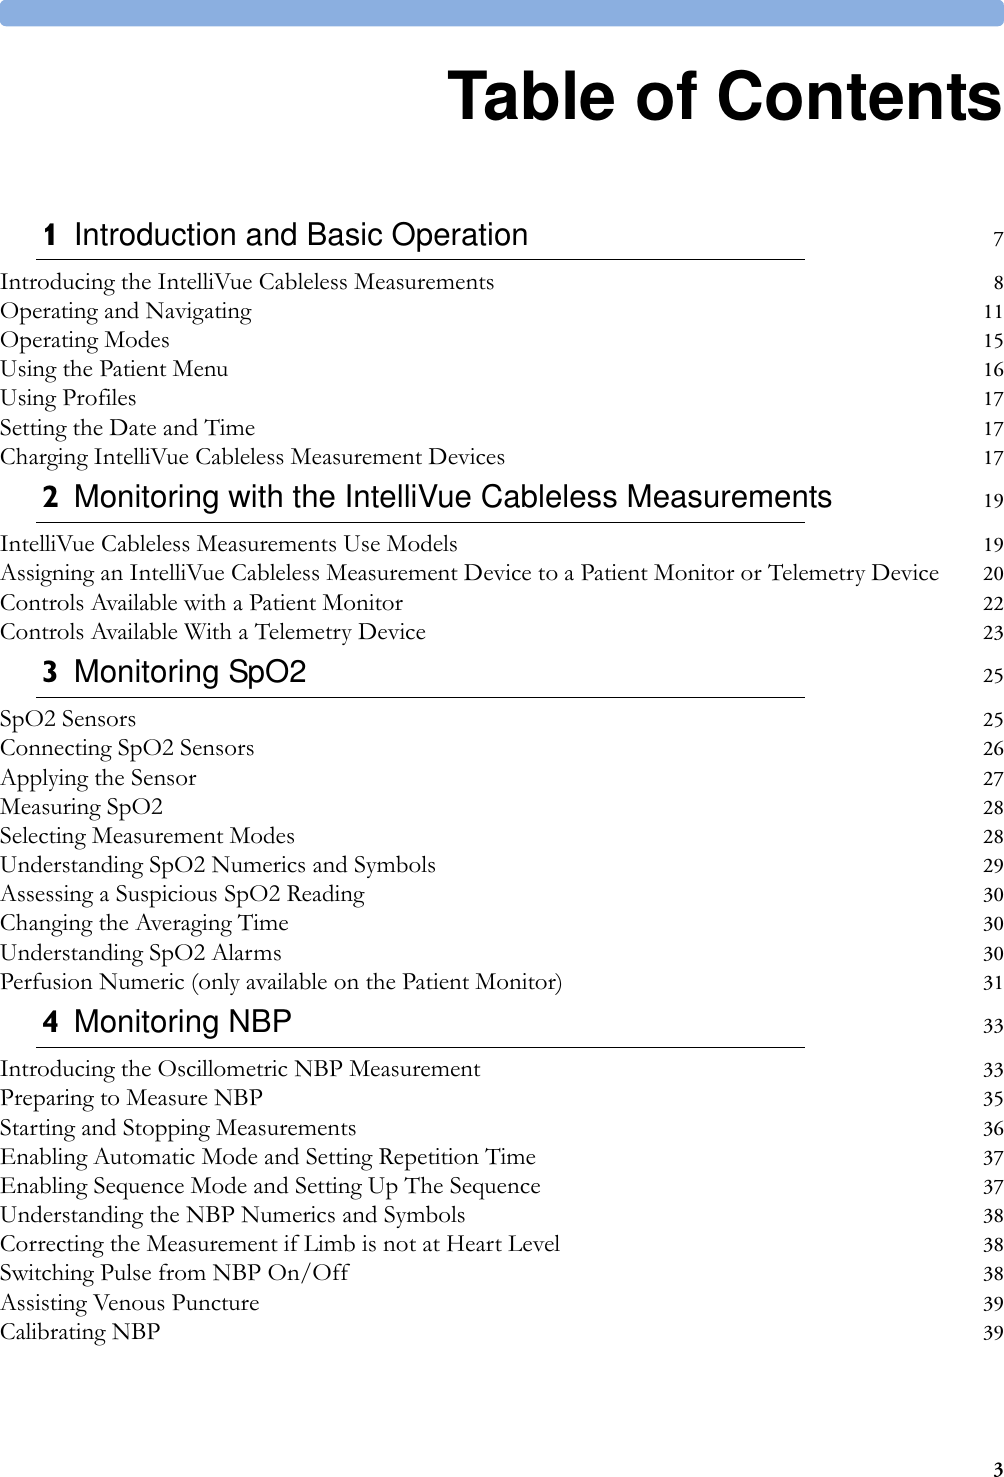 31Table of Contents1Introduction and Basic Operation 7Introducing the IntelliVue Cableless Measurements 8Operating and Navigating 11Operating Modes 15Using the Patient Menu 16Using Profiles 17Setting the Date and Time 17Charging IntelliVue Cableless Measurement Devices 172Monitoring with the IntelliVue Cableless Measurements 19IntelliVue Cableless Measurements Use Models 19Assigning an IntelliVue Cableless Measurement Device to a Patient Monitor or Telemetry Device 20Controls Available with a Patient Monitor 22Controls Available With a Telemetry Device 233Monitoring SpO2 25SpO2 Sensors 25Connecting SpO2 Sensors 26Applying the Sensor 27Measuring SpO2 28Selecting Measurement Modes 28Understanding SpO2 Numerics and Symbols 29Assessing a Suspicious SpO2 Reading 30Changing the Averaging Time 30Understanding SpO2 Alarms 30Perfusion Numeric (only available on the Patient Monitor) 314Monitoring NBP 33Introducing the Oscillometric NBP Measurement 33Preparing to Measure NBP 35Starting and Stopping Measurements 36Enabling Automatic Mode and Setting Repetition Time 37Enabling Sequence Mode and Setting Up The Sequence 37Understanding the NBP Numerics and Symbols 38Correcting the Measurement if Limb is not at Heart Level 38Switching Pulse from NBP On/Off 38Assisting Venous Puncture 39Calibrating NBP 39